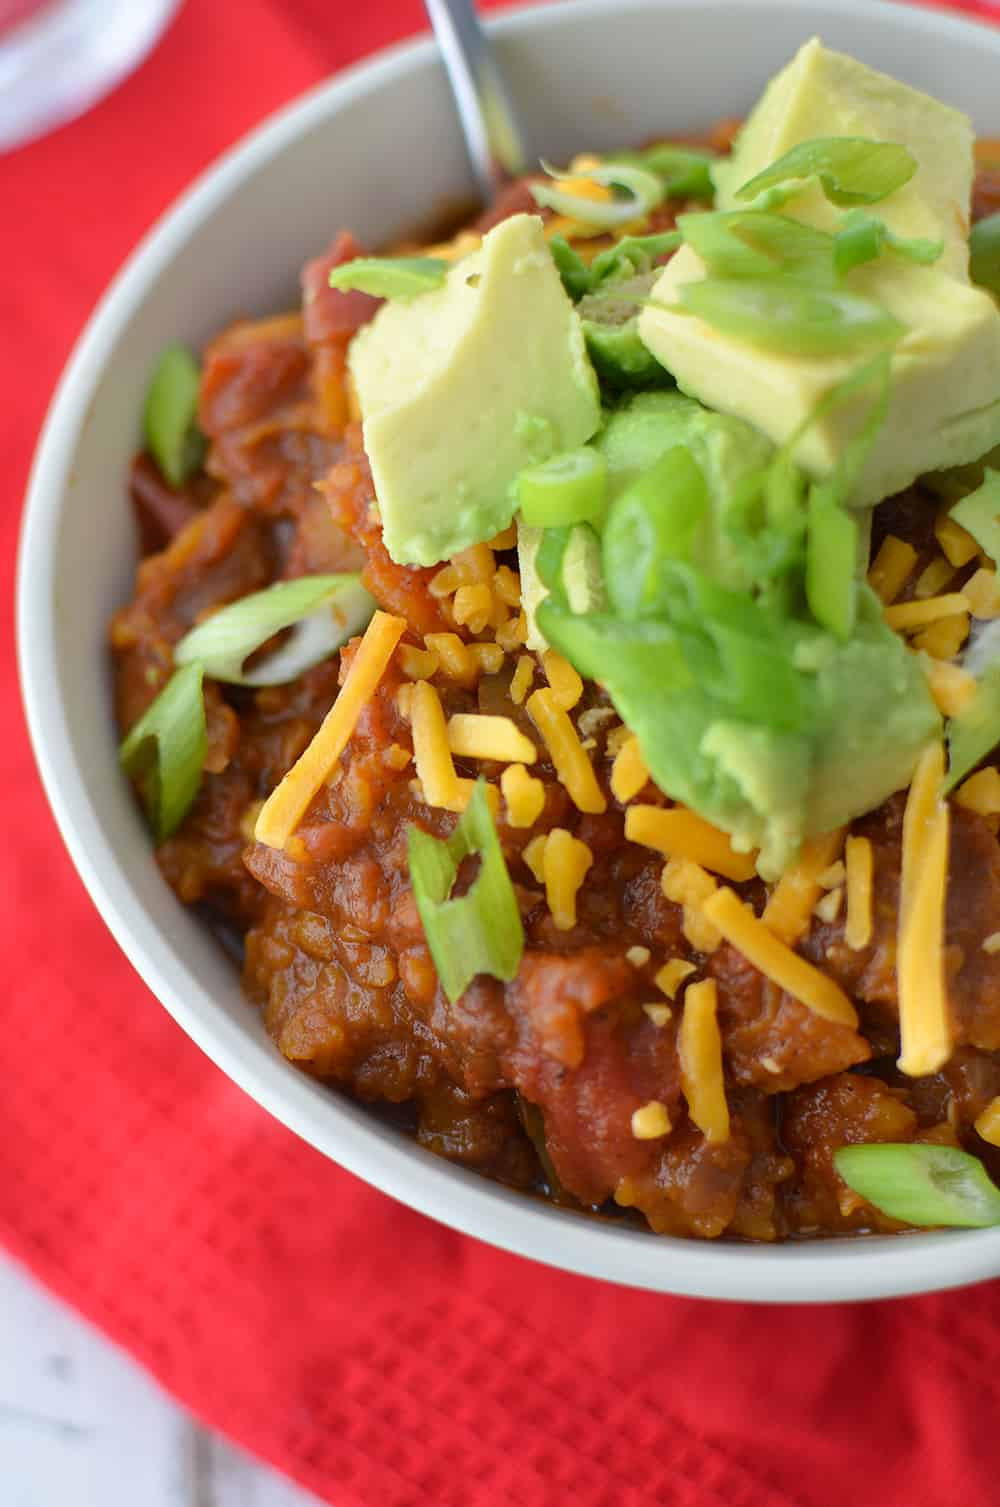 Vegetarian Chili With Squash
 ve arian chili slow cooker butternut squash